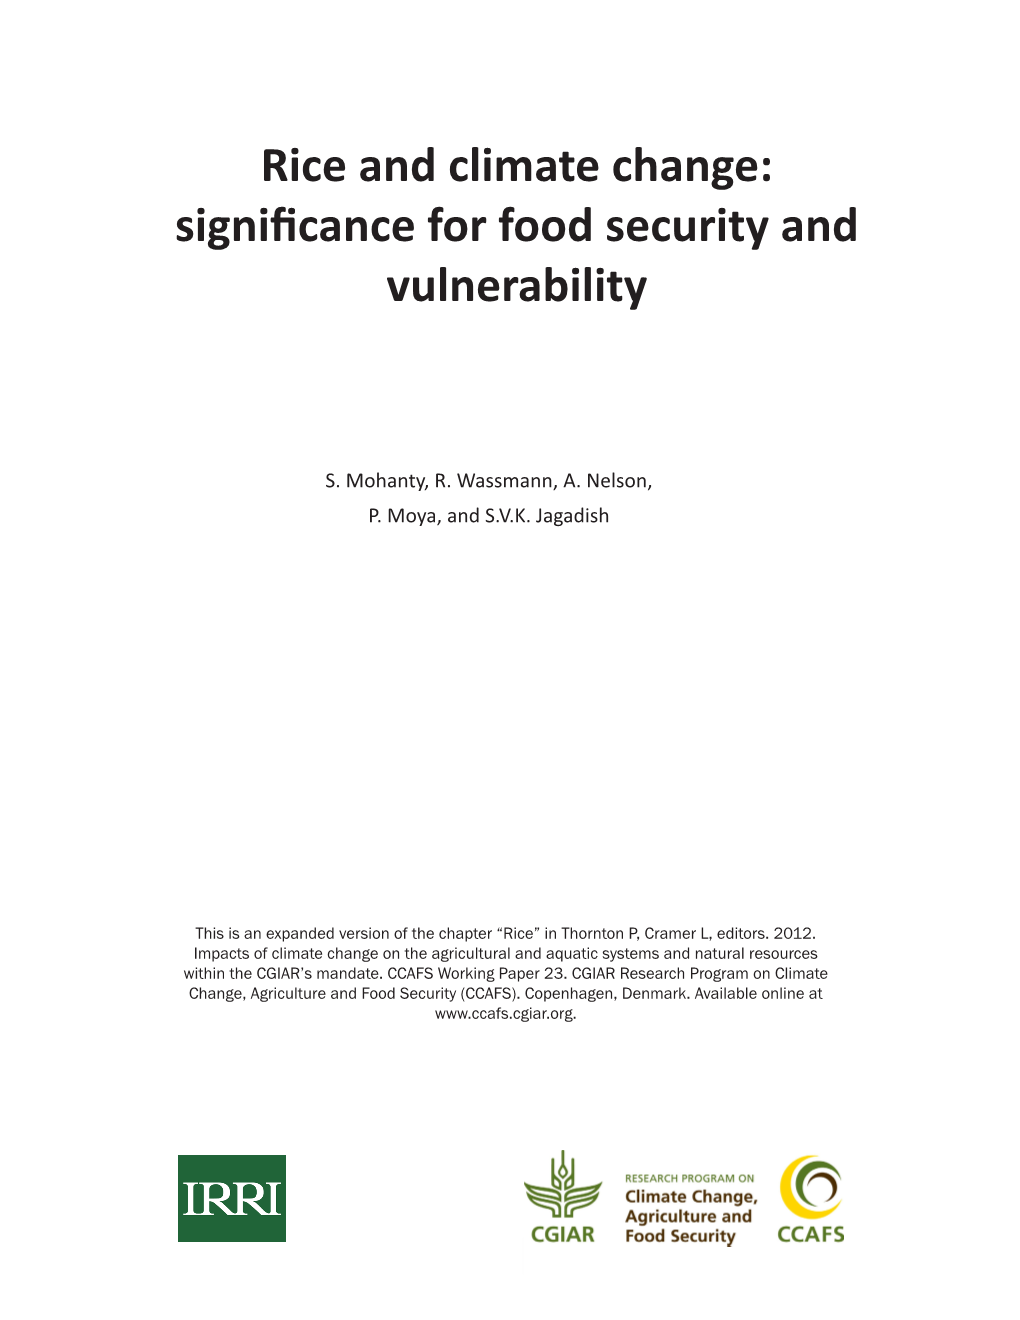 Rice and Climate Change: Significance for Food Security and Vulnerability